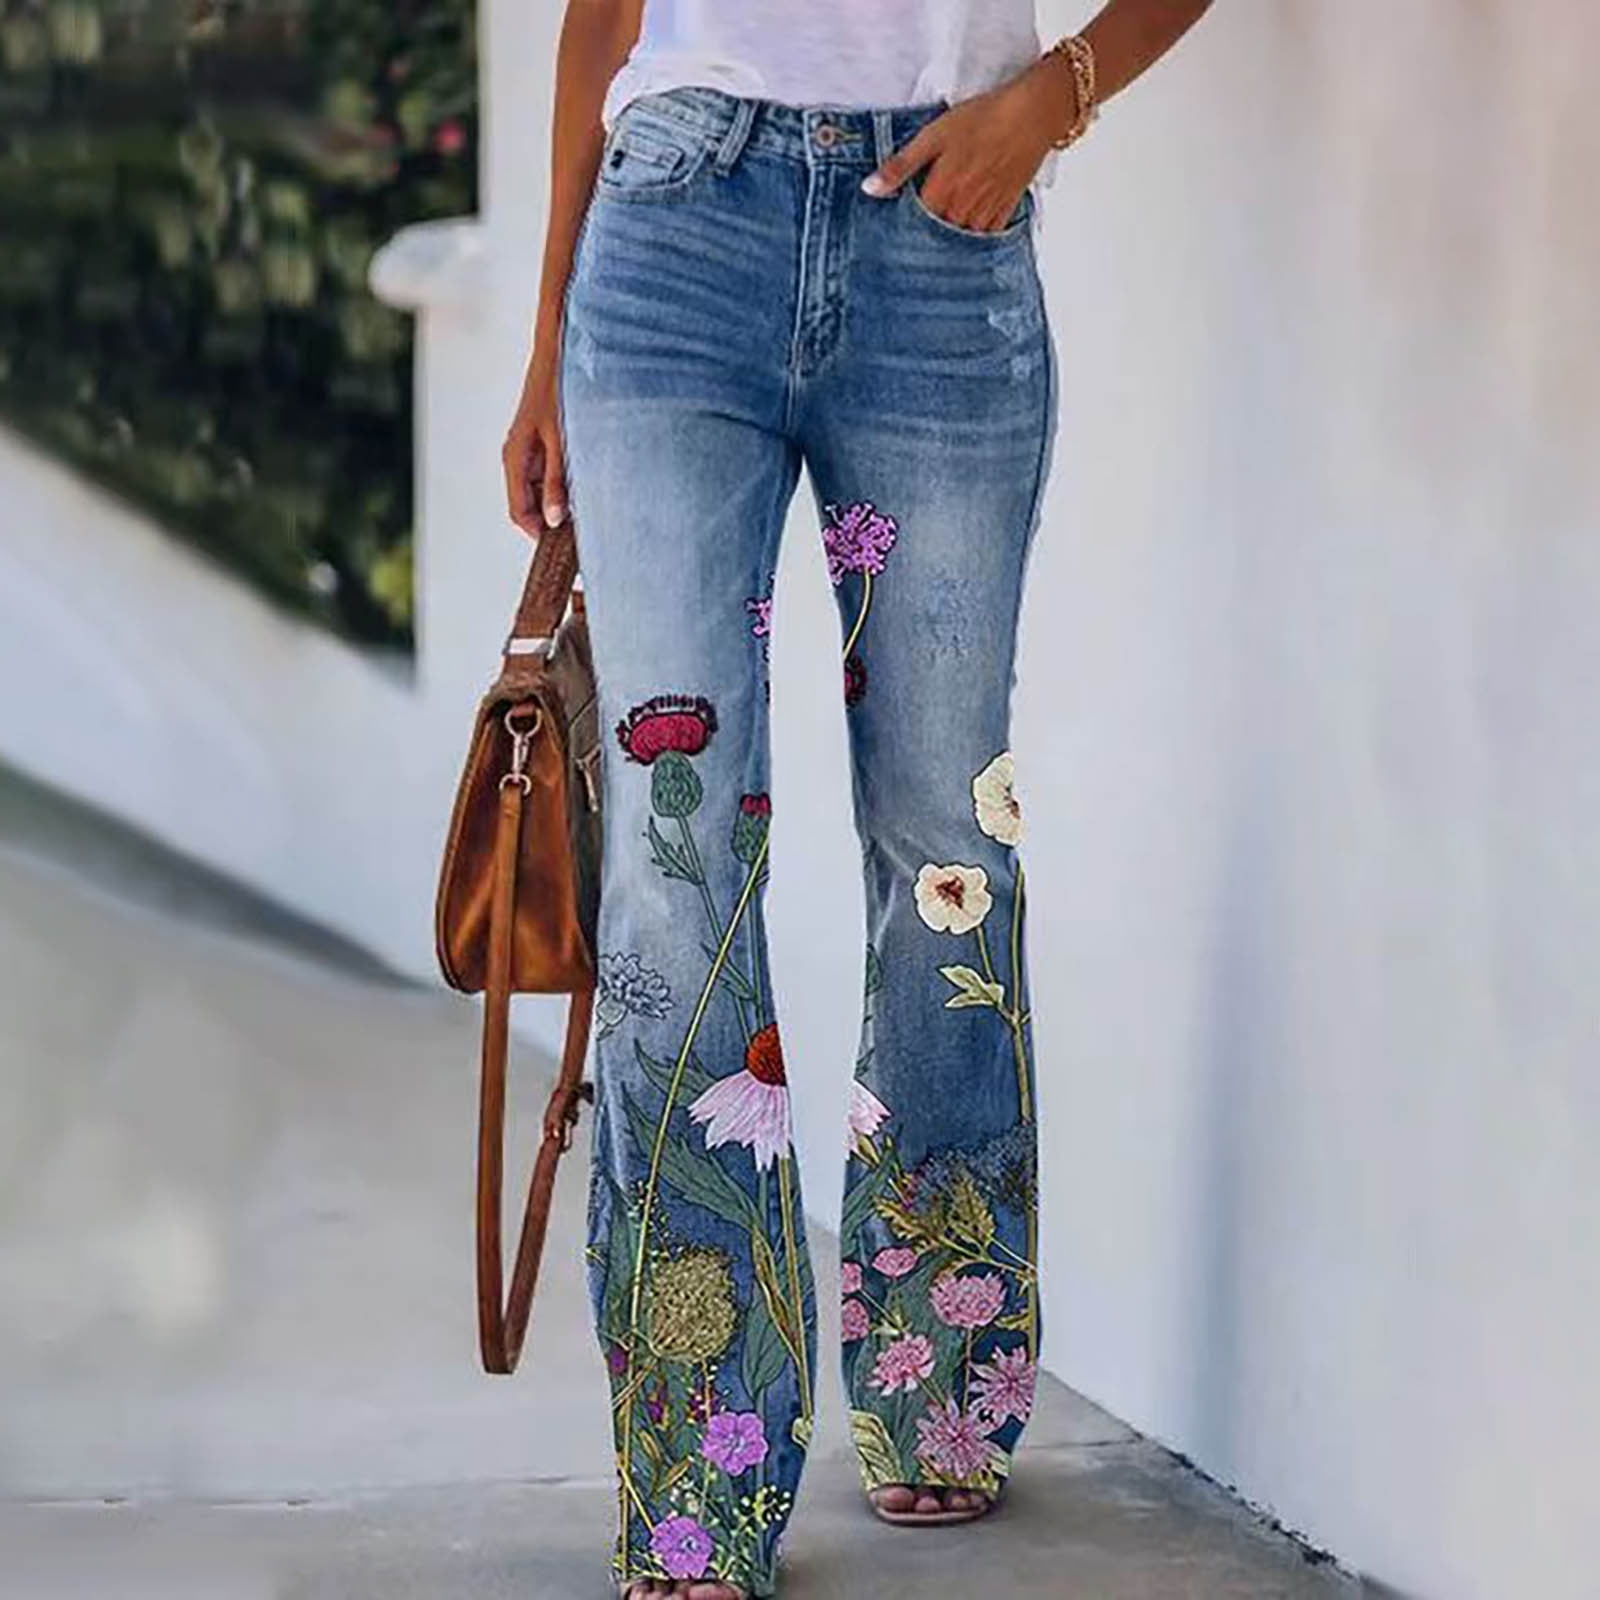 Mid Rise Jeans for Women Vintage Embroidery Floral Stretch Skinny Flare Leg  Thin Denim Pants Plus Size Pockets Jeans - Walmart.com